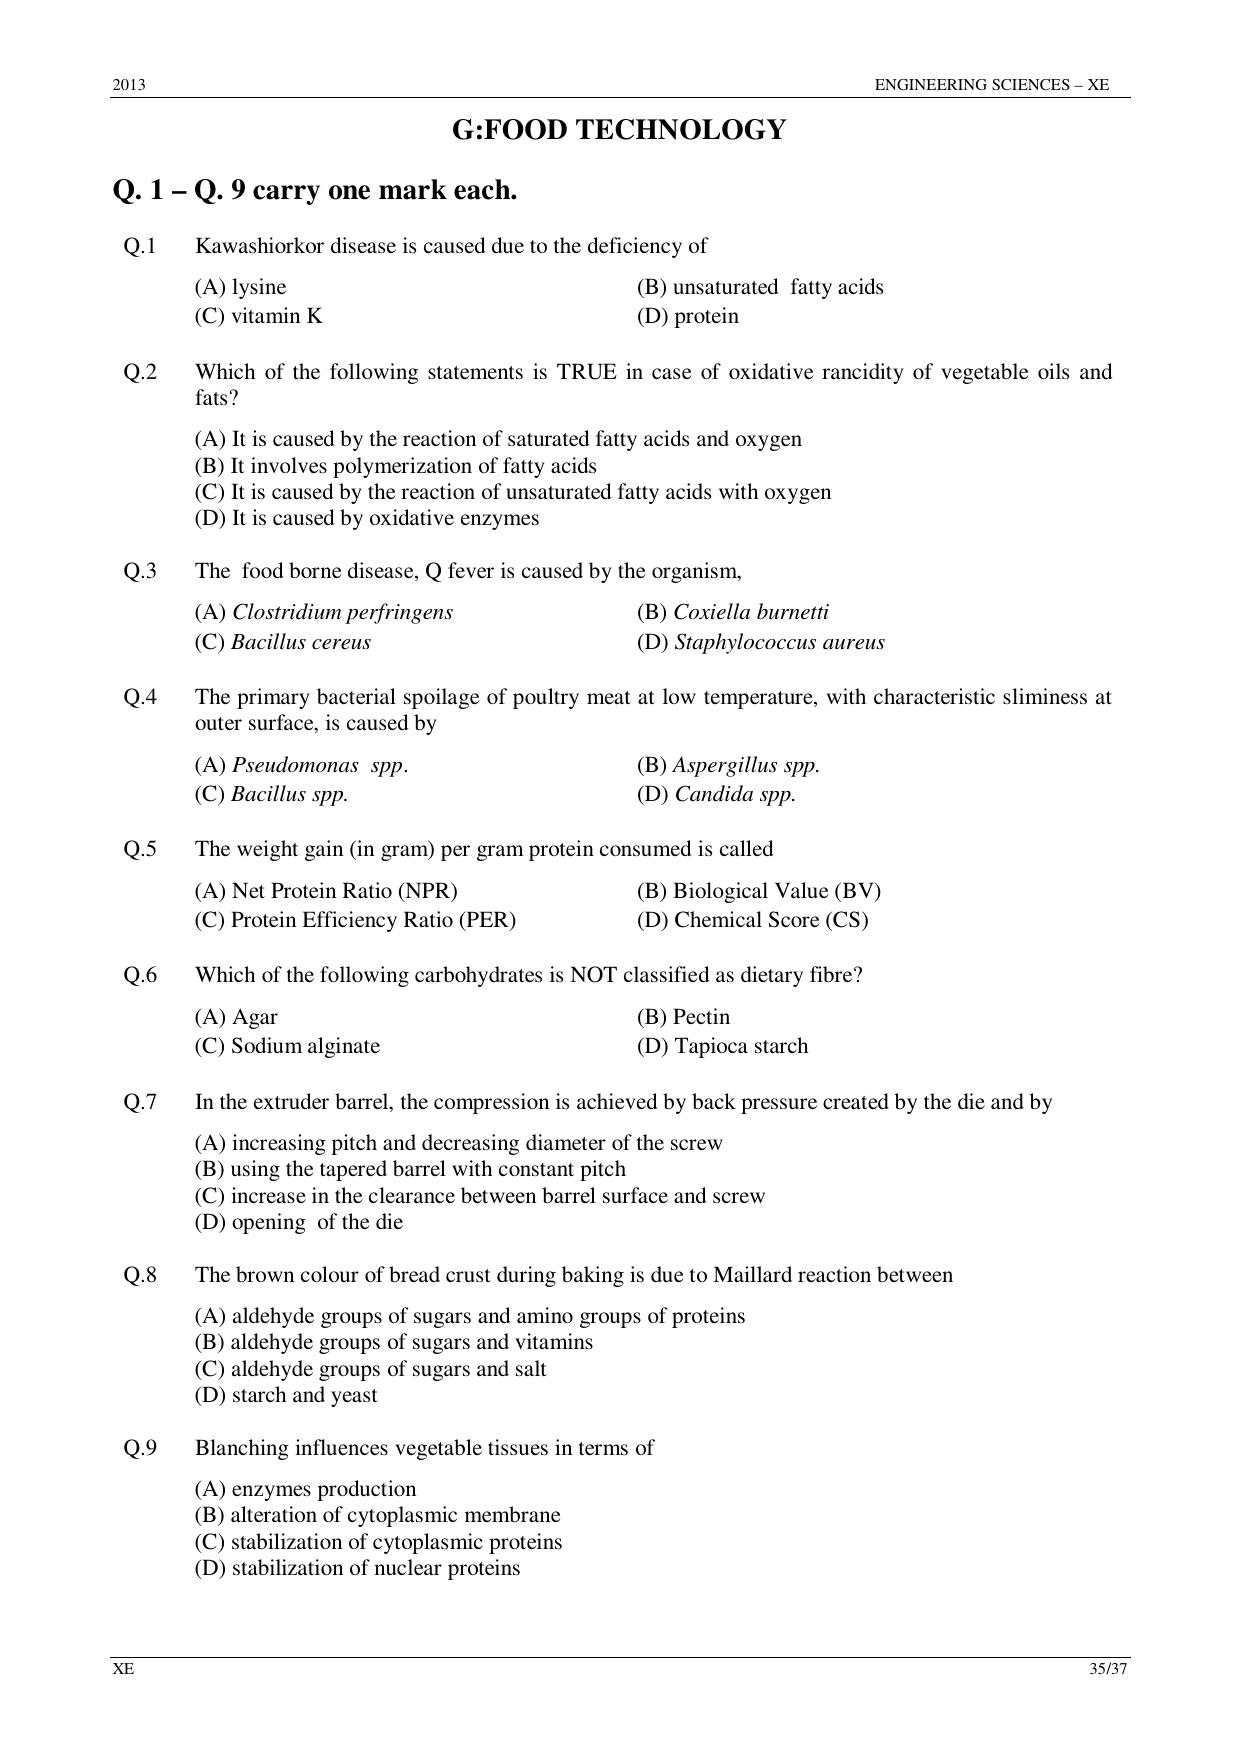 GATE 2013 Engineering Sciences (XE) Question Paper with Answer Key - Page 35